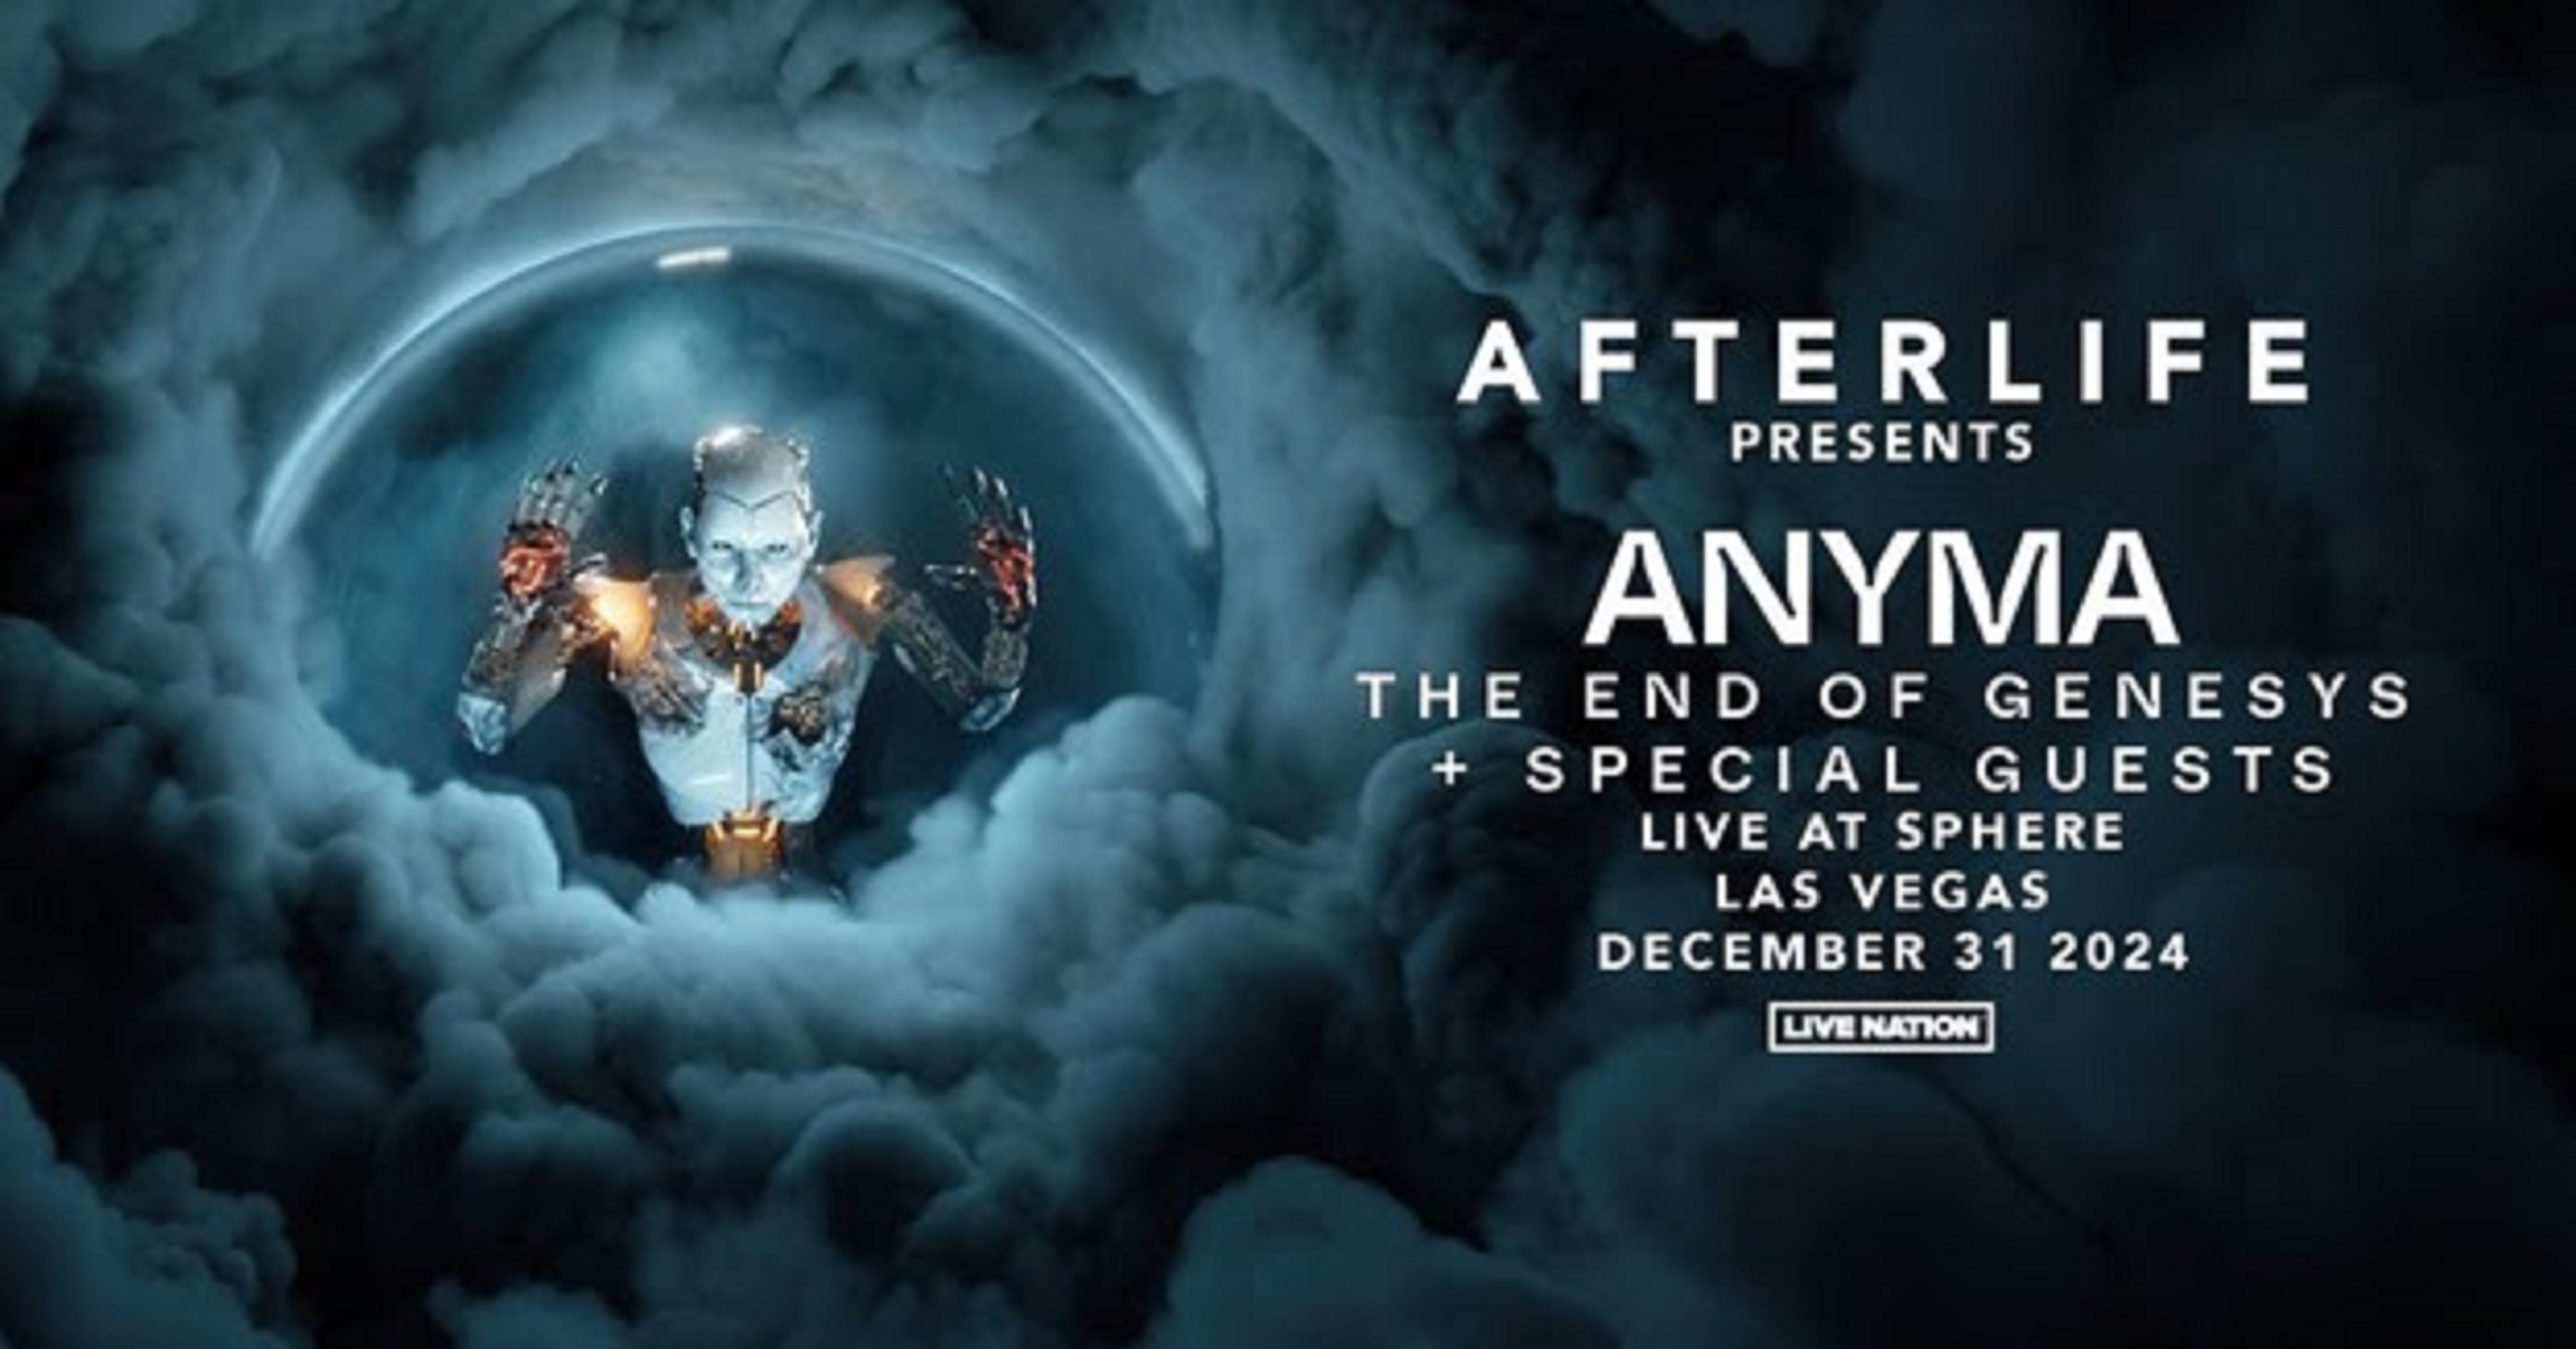 Afterlife Presents Anyma 'The End of Genesys' Live At Sphere - Las Vegas - December 31, 2024